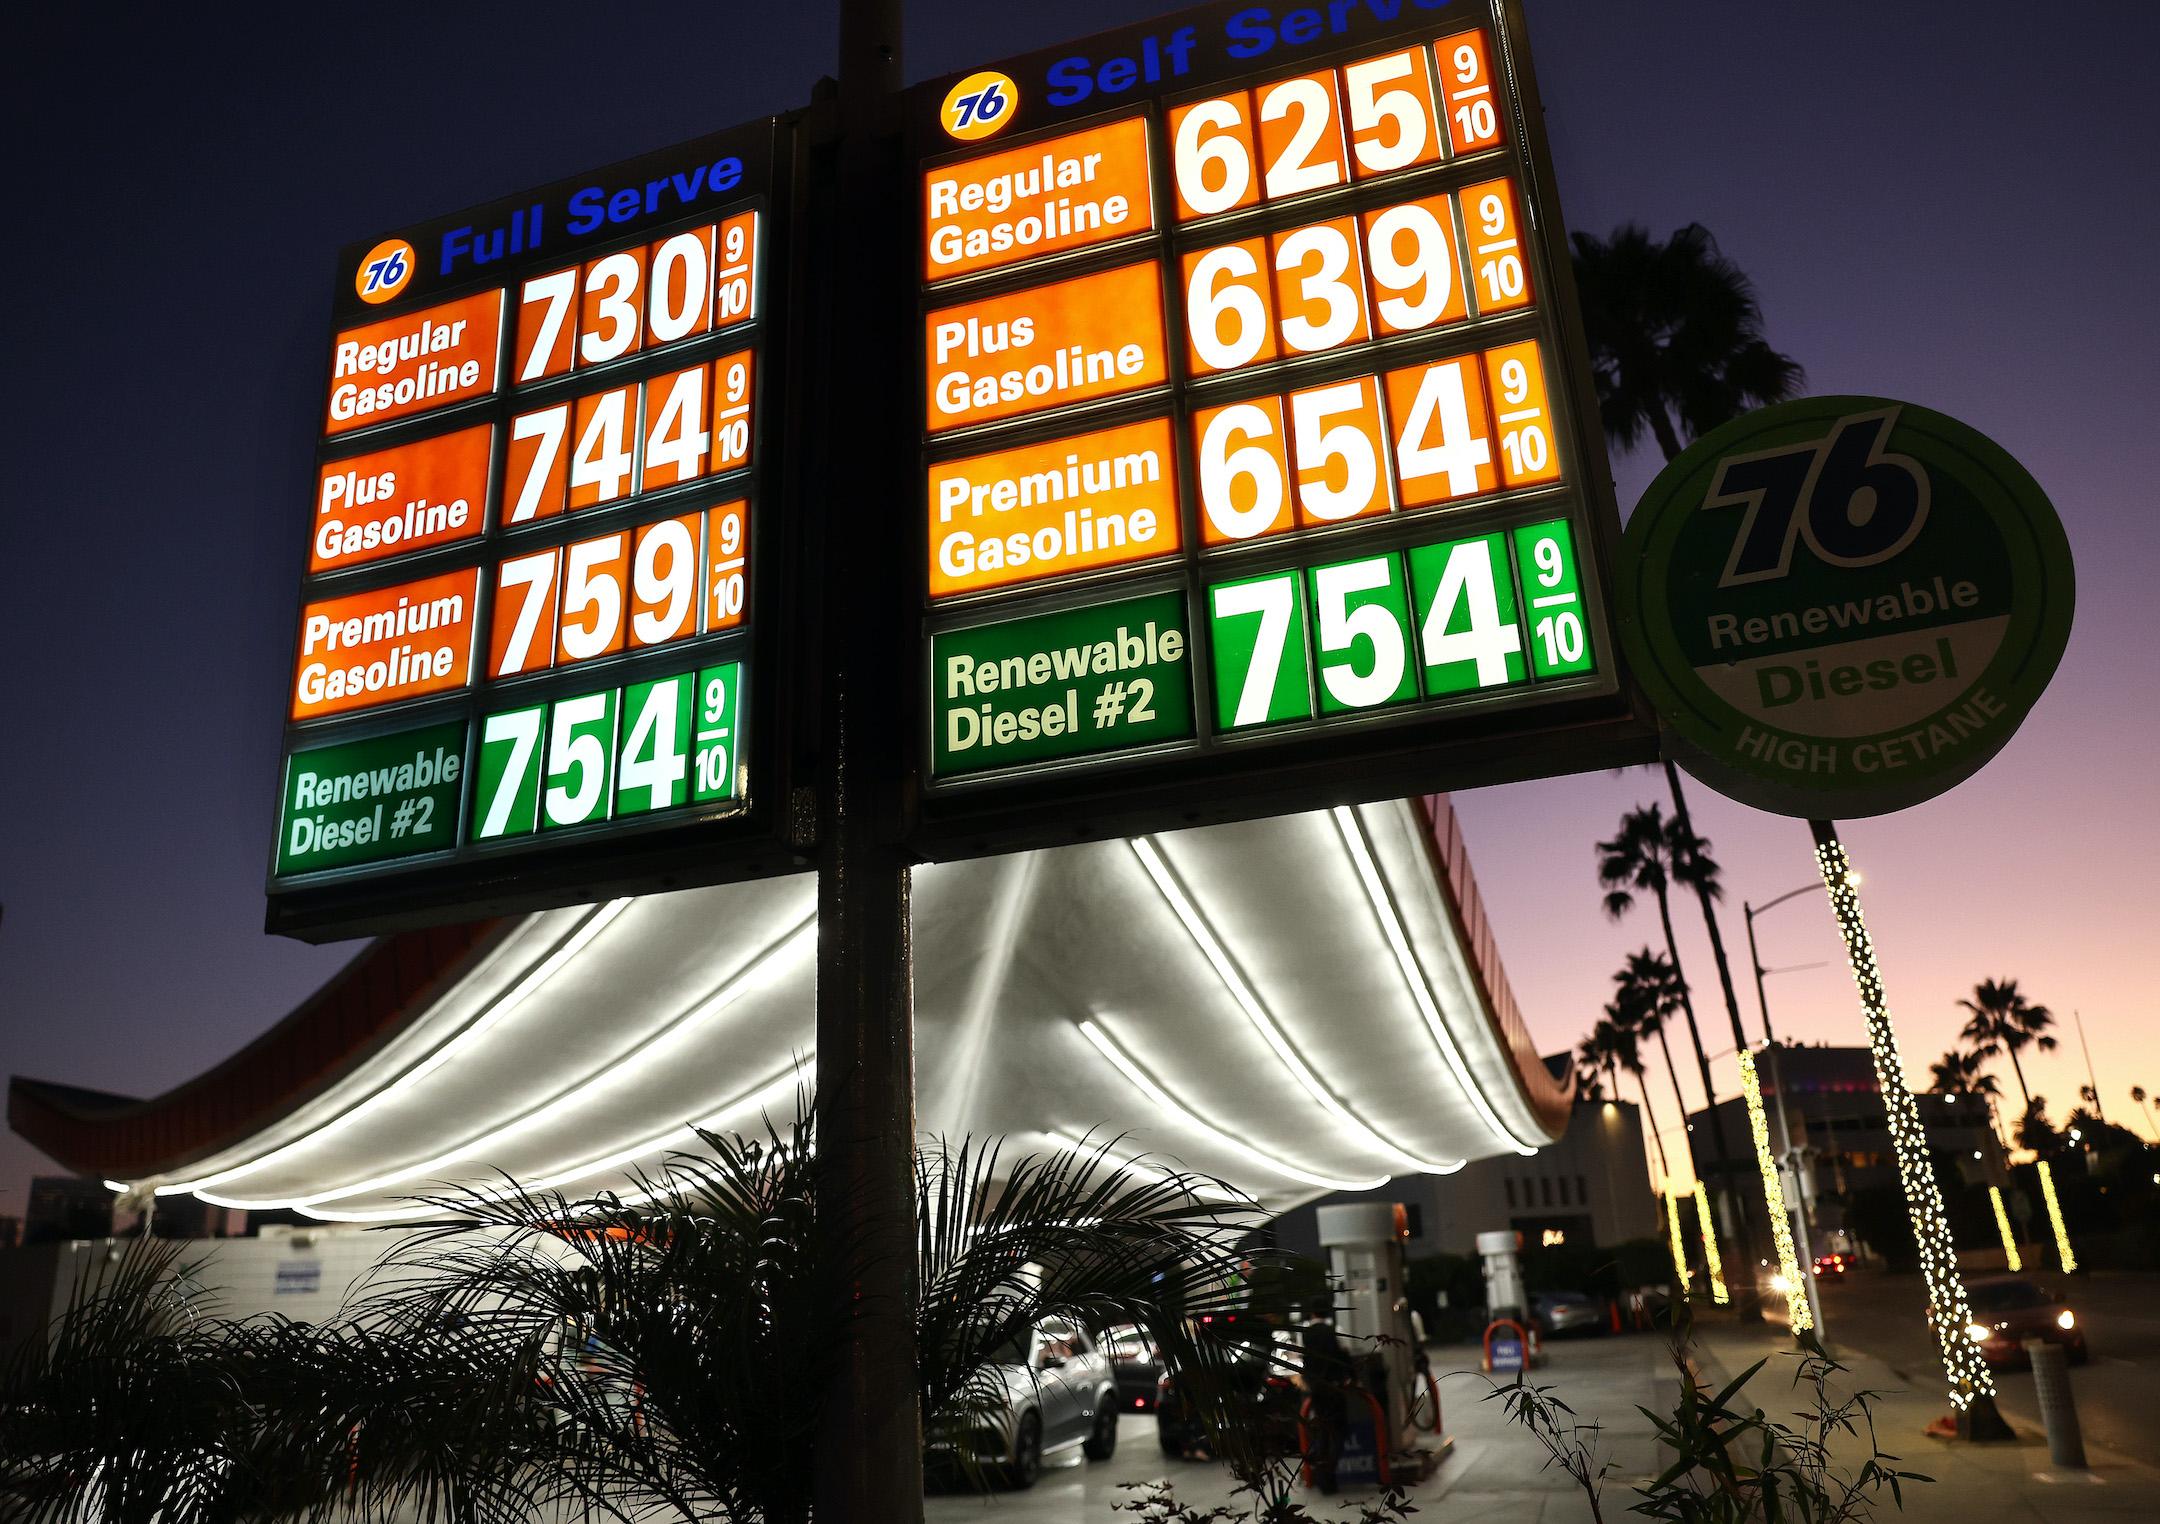 New California Oil Price Czar Reports Market Fluctuations Impacting Gas Price Hikes